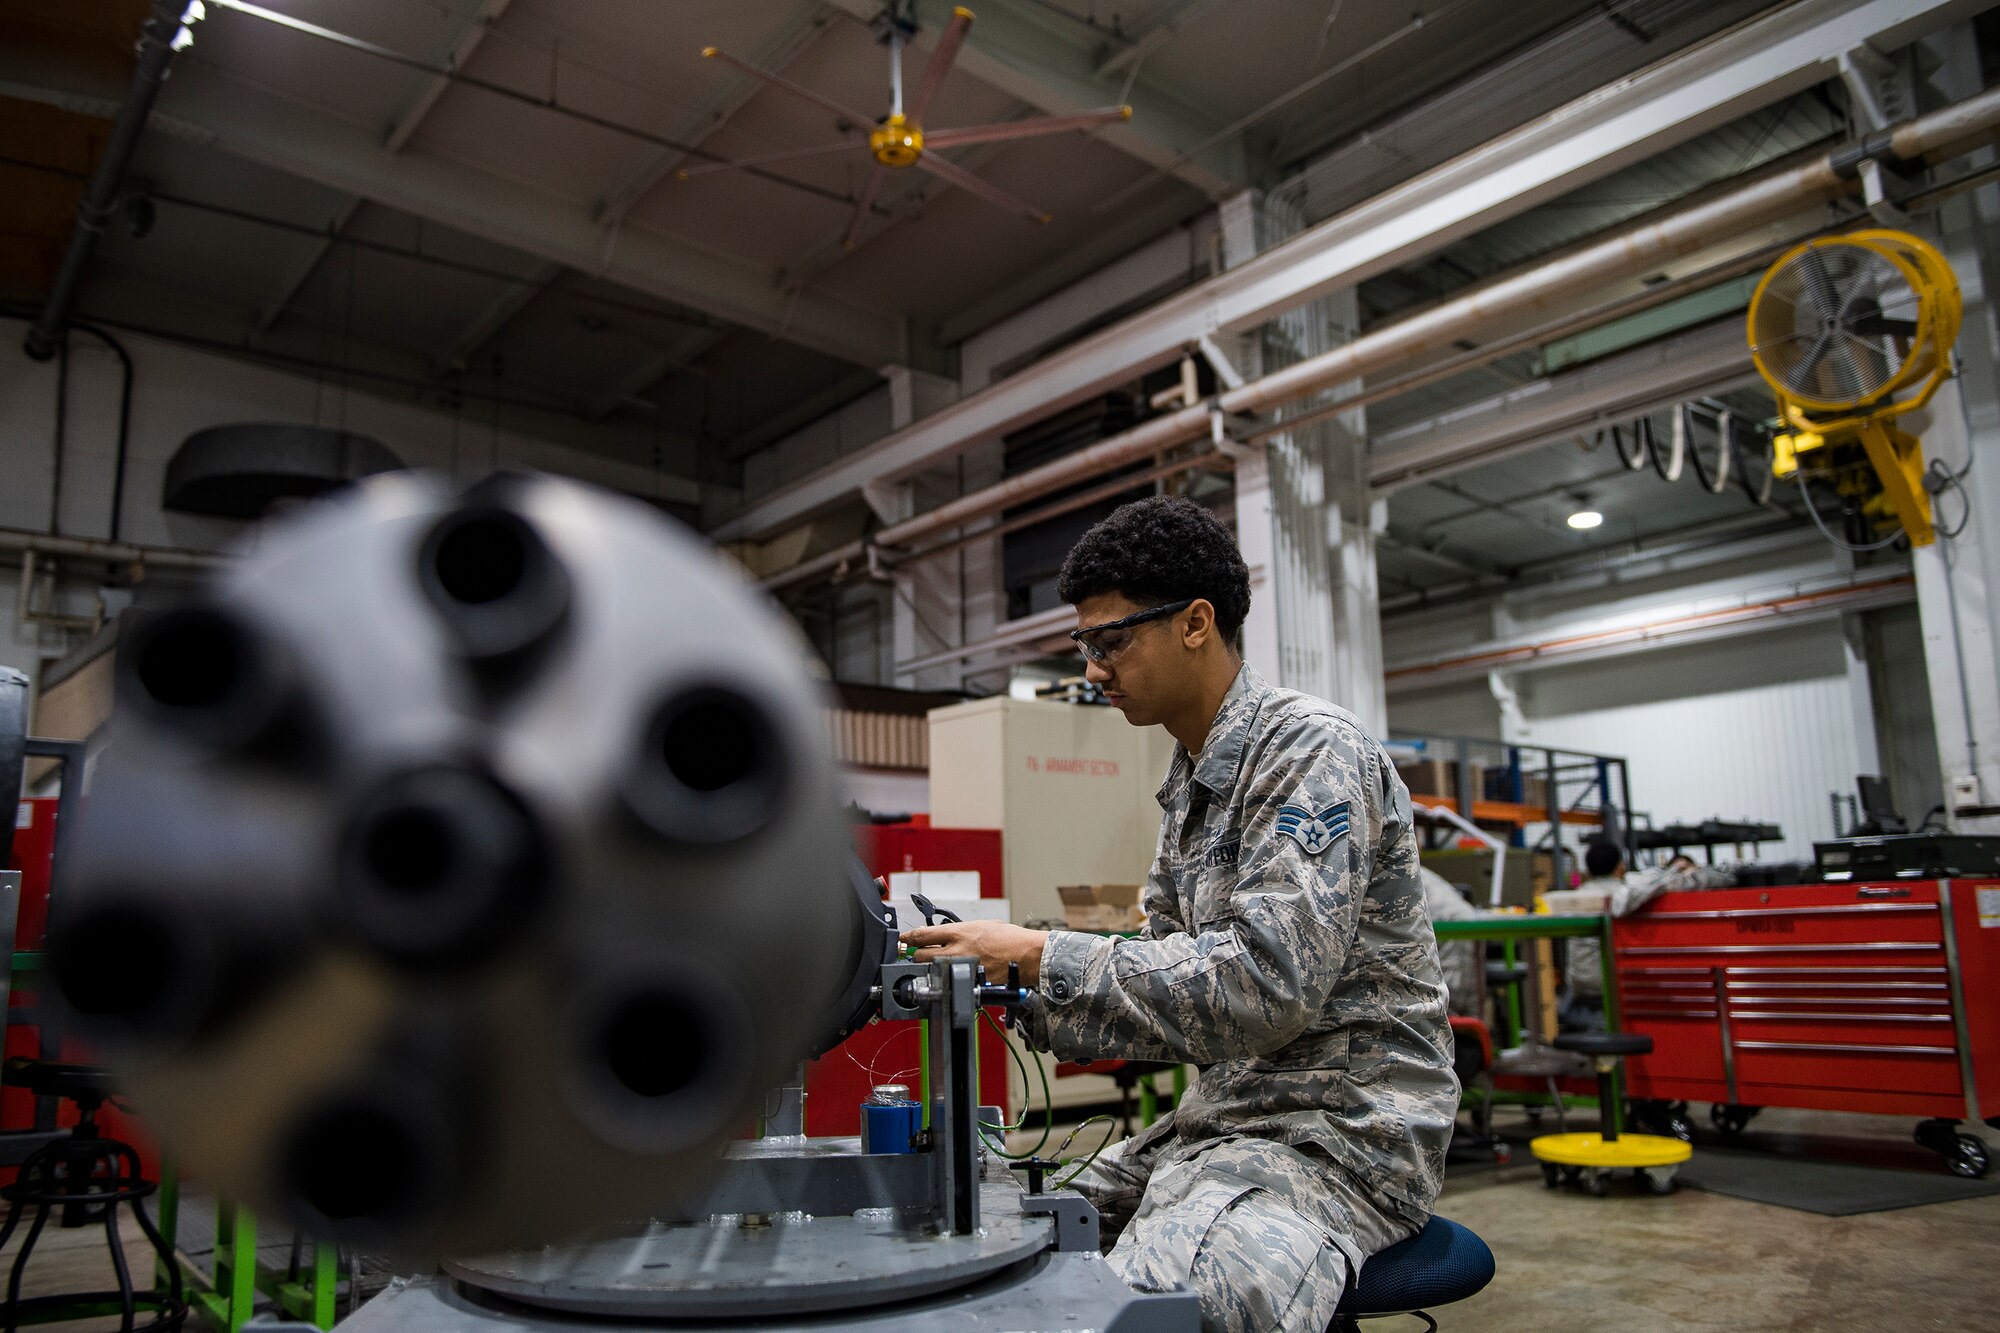 Senior Airman Jordan Harrison, 51st Munitions Squadron F-16 armament systems technician, fixes a component on an F-16 20mm gun, Oct. 23, 2019, at Osan Air Base, Republic of Korea. Born just one minute apart, Jordan and his fraternal brother Quinn have been inseparable “wingmen” since birth. They recently reunited and both serve in the 51st Munitions Squadron as members of the friendly rivaled armament and ammo sections. (U.S. Air Force photo by Staff Sgt. Greg Nash)